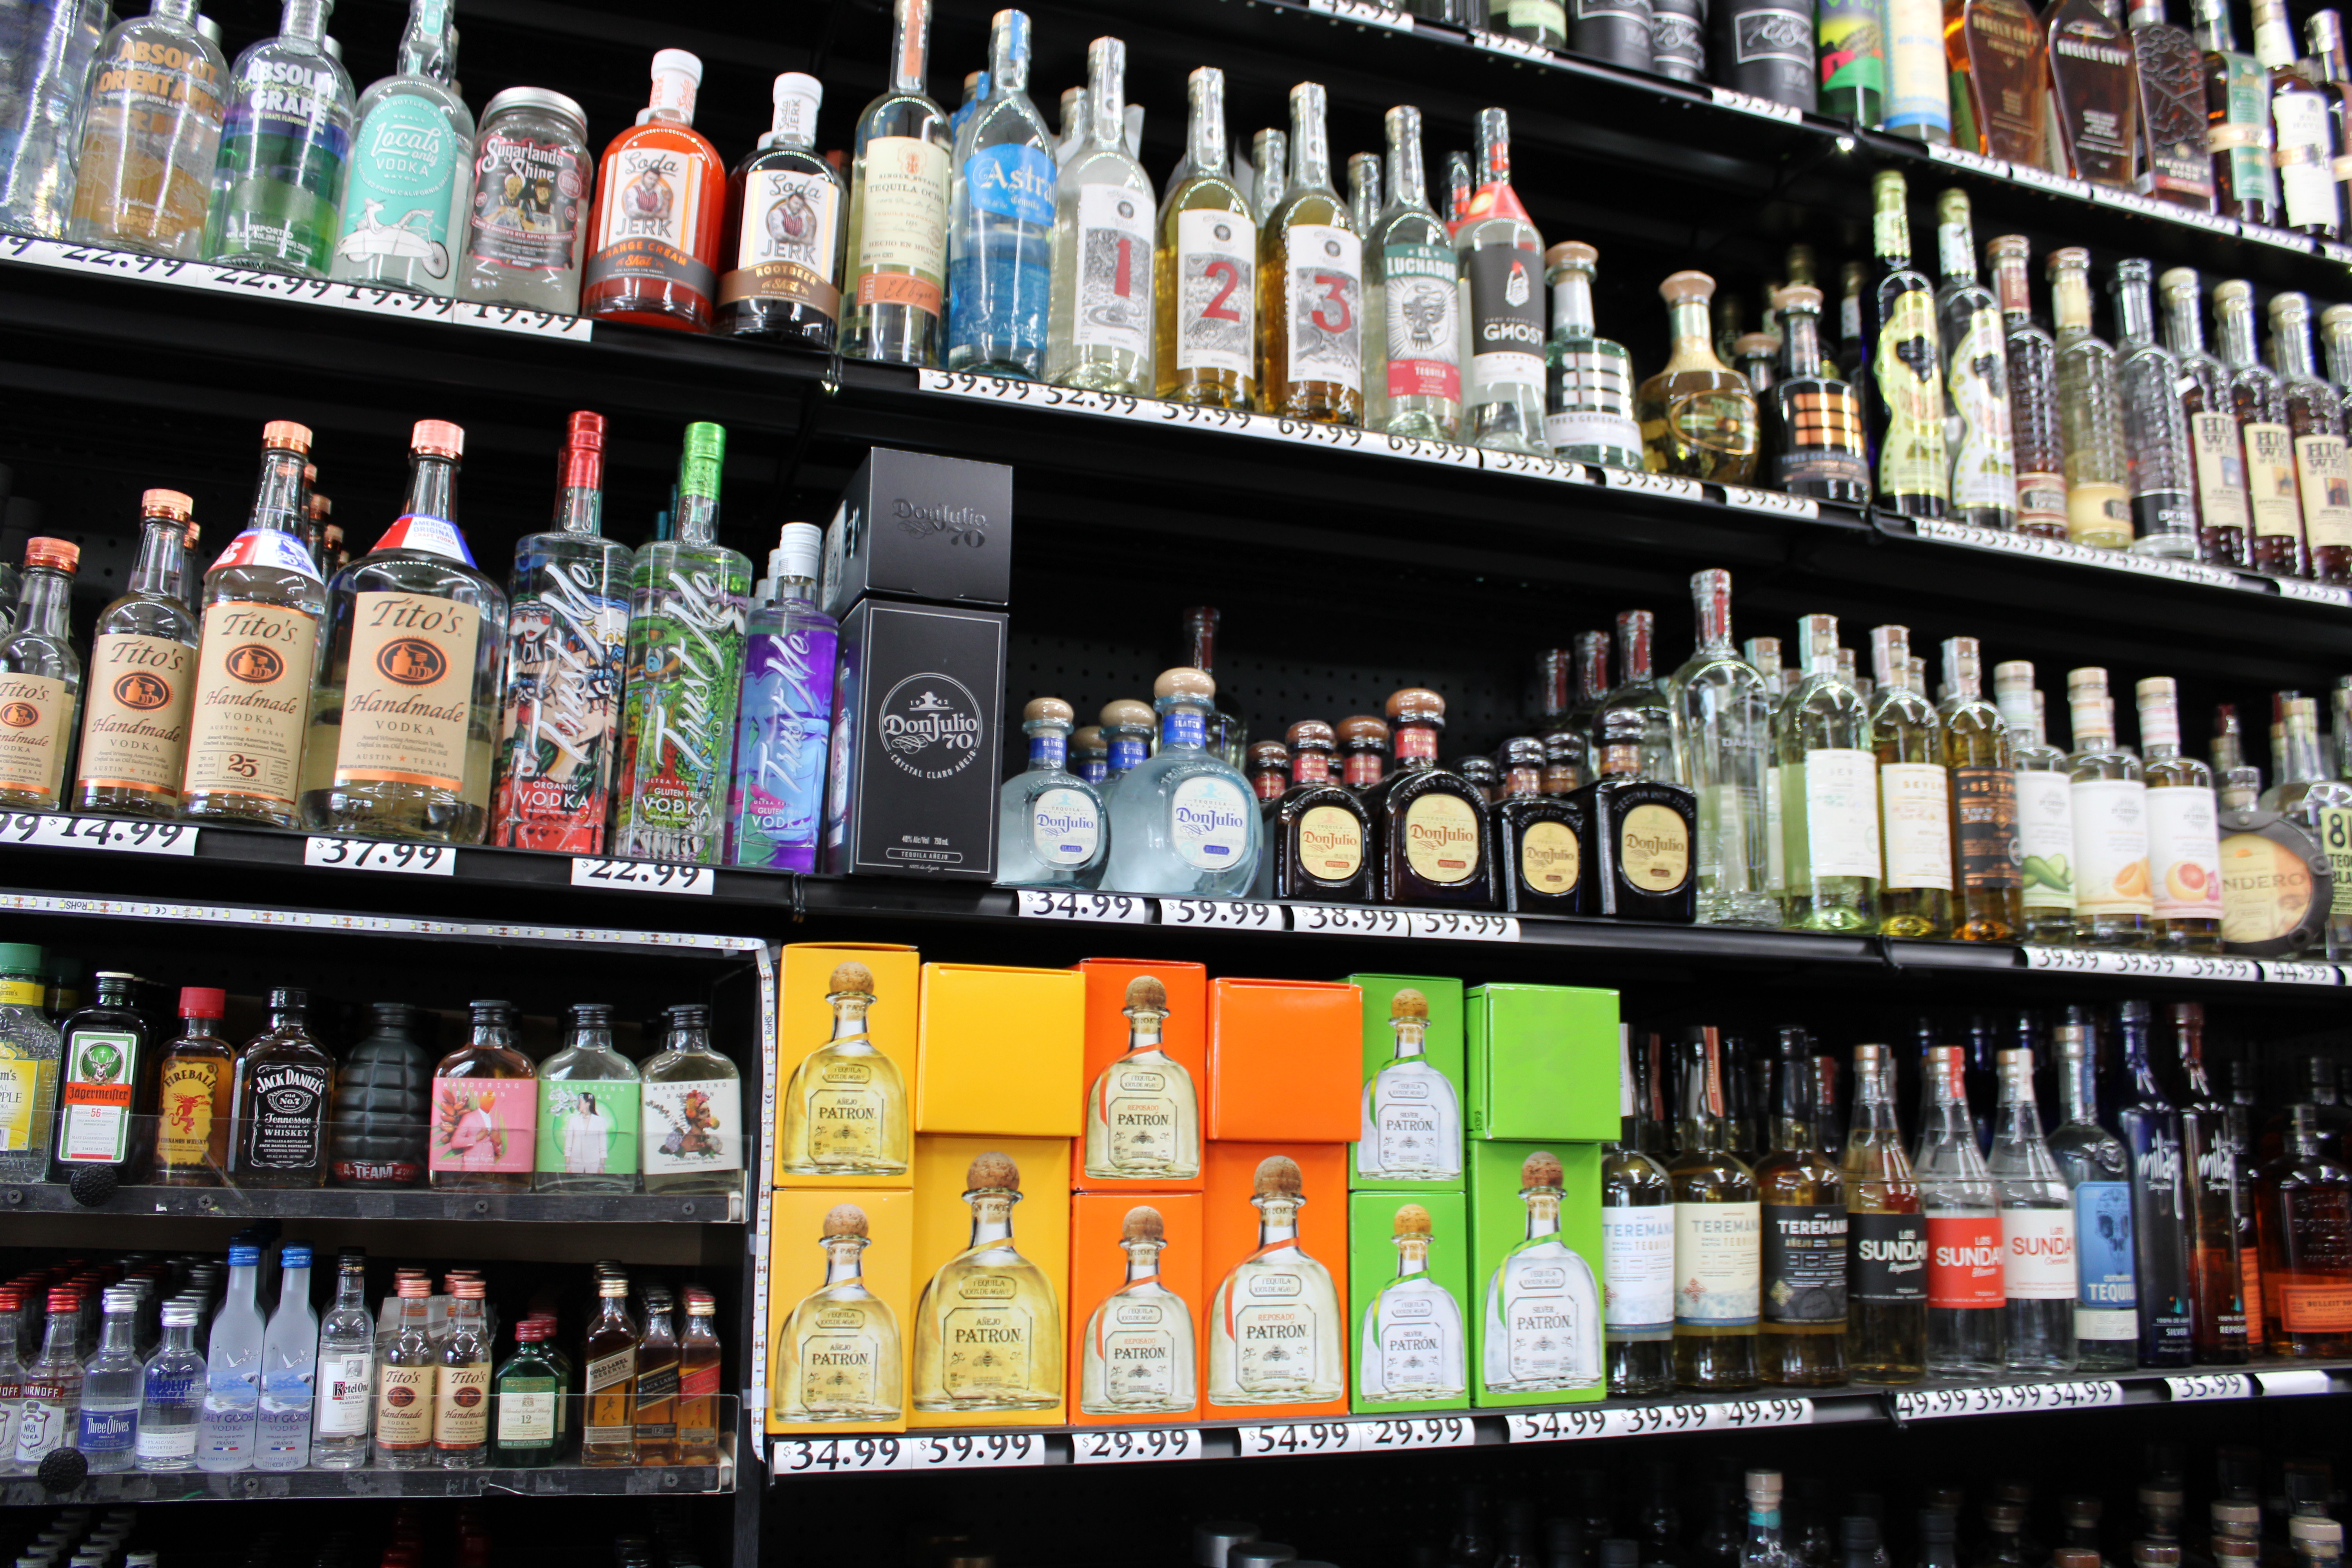 Happy Time Liquor has everything you need to gear up for a great night. Our liquor store in San Diego, CA, offers a wide selection of high-quality liquor, wine, spirits, beer, hard seltzers, and more! Pick up your favorite vodka, tequila, mezcal, rum, whisky, bourbon, or gin, plus any mixers, garnish, or soda you like.